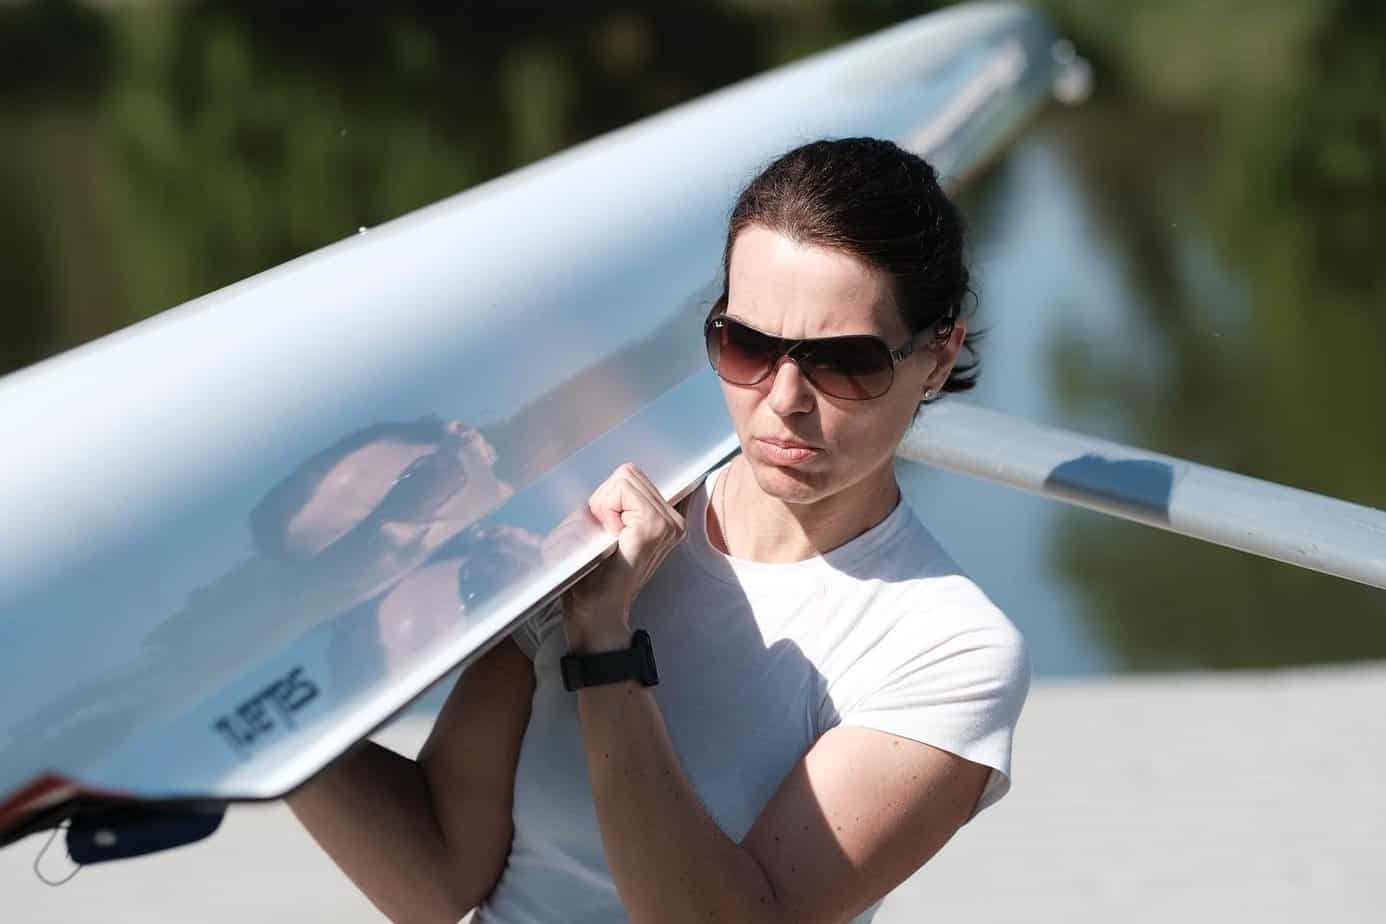 Slnava Piestany Rowing Club - a woman carrying a sculling shell